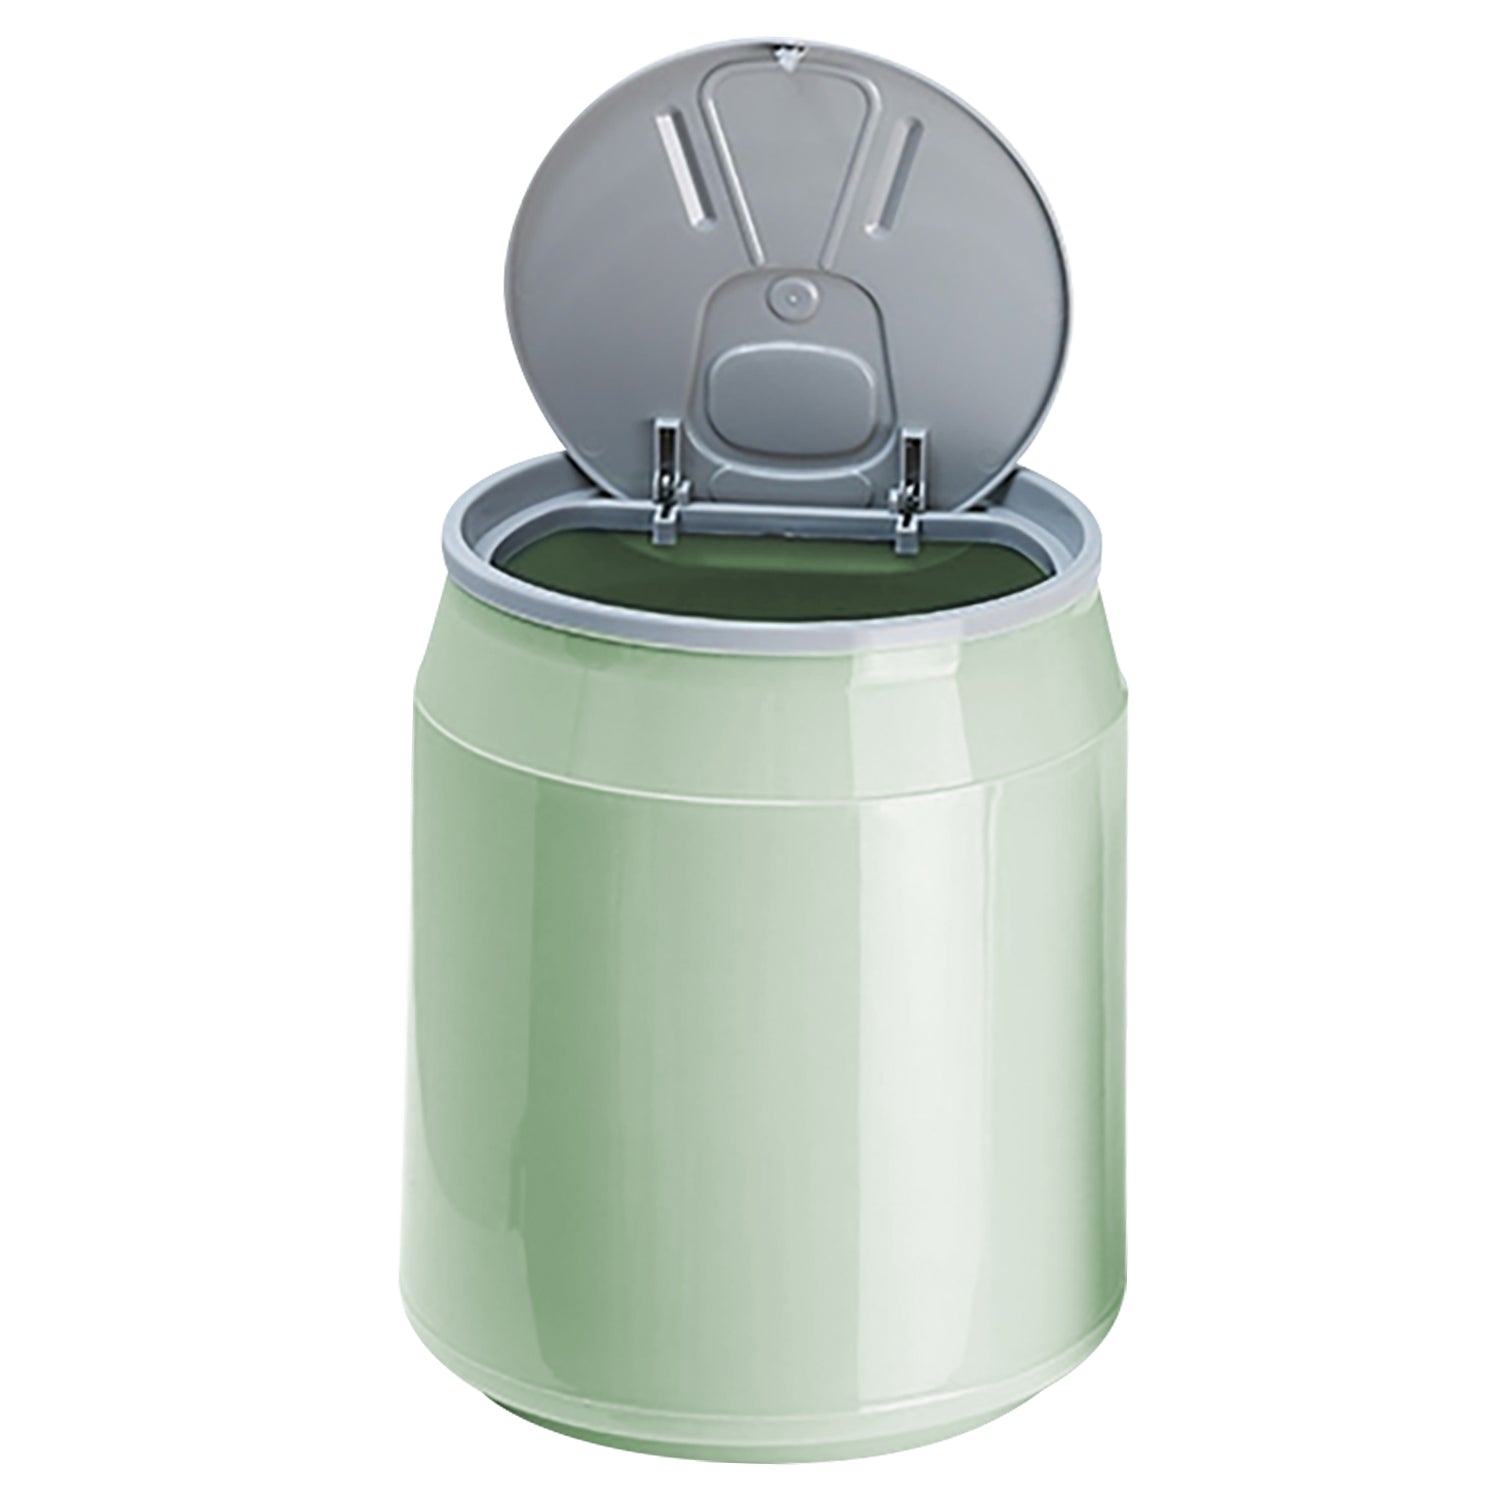 Load image into Gallery viewer, Push-Top Oversized Soda Can Trash Bin | Cute Soda Can Desk Bucket Storage With Pop Top